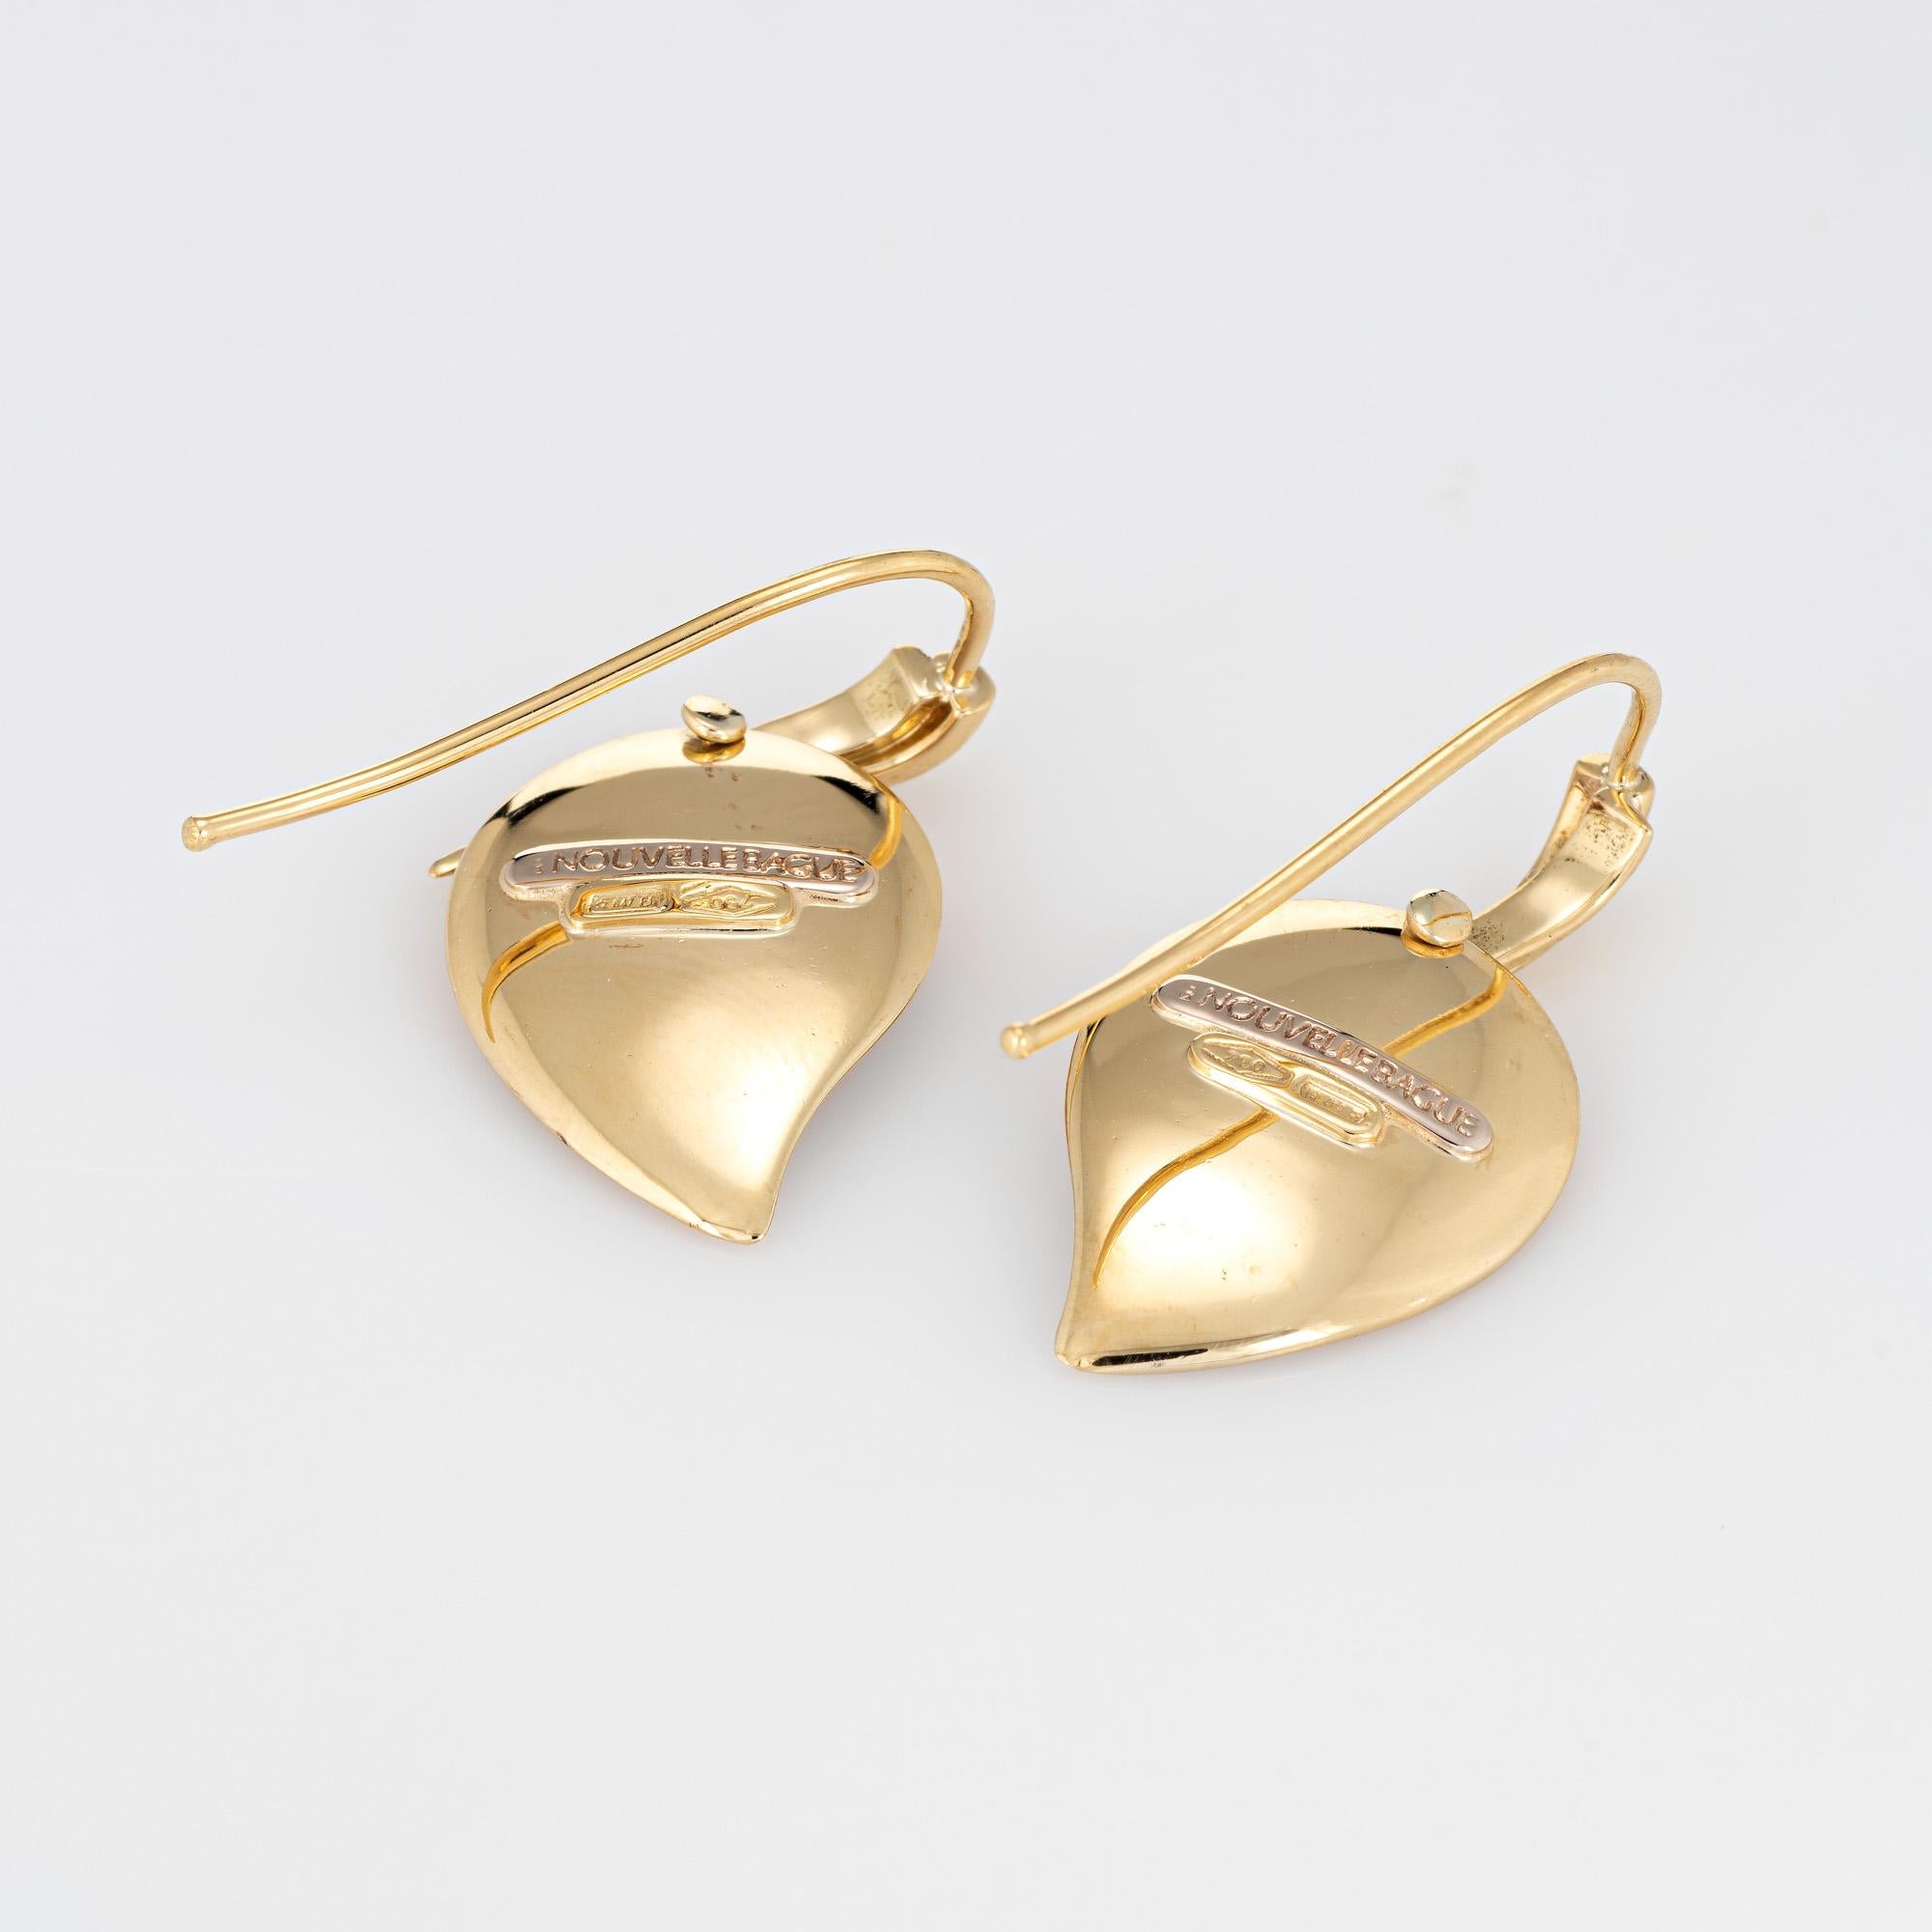 Fine detailed pair of La Nouvelle Bague earrings crafted in 18k yellow gold. 

Pink enamel is set into the mounts (in excellent condition and free of cracks or chips).  

The stylish earrings are set with whisper pink enamel in leaf drop mounts. The